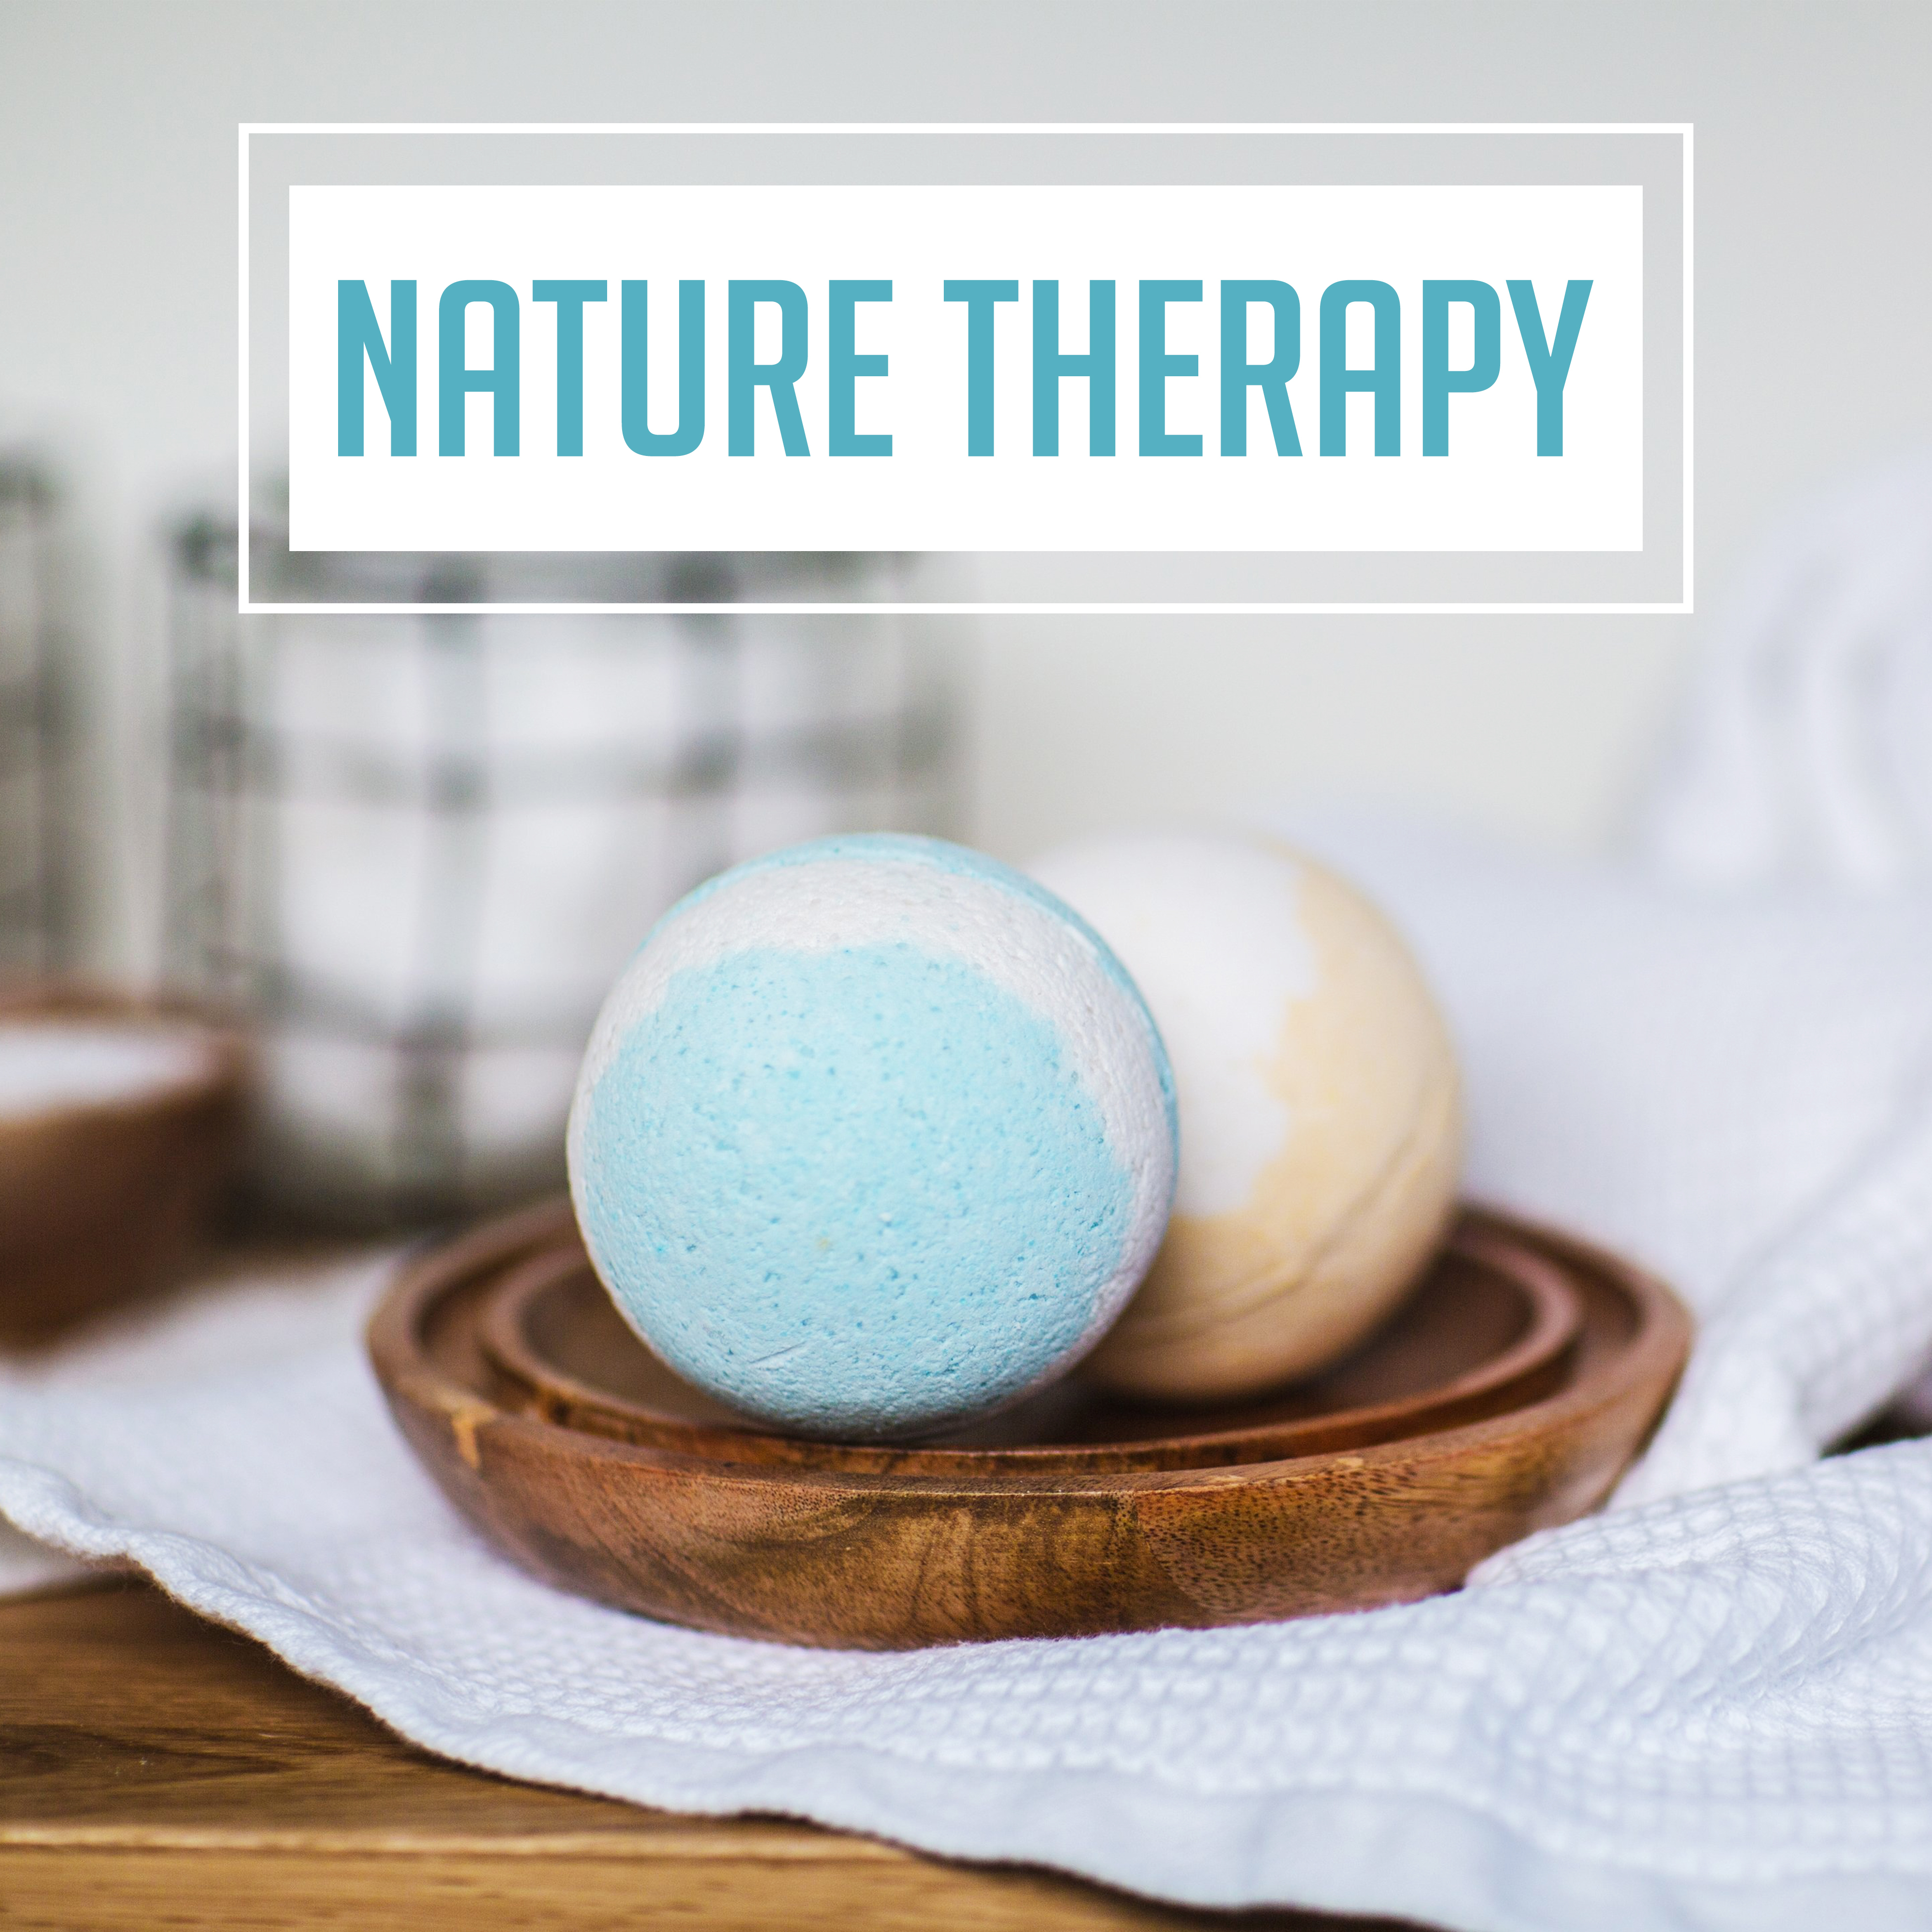 Nature Therapy – Delicate Music for Spa, Wellness, Deep Meditation, Soft Spa Music, Pure Relax